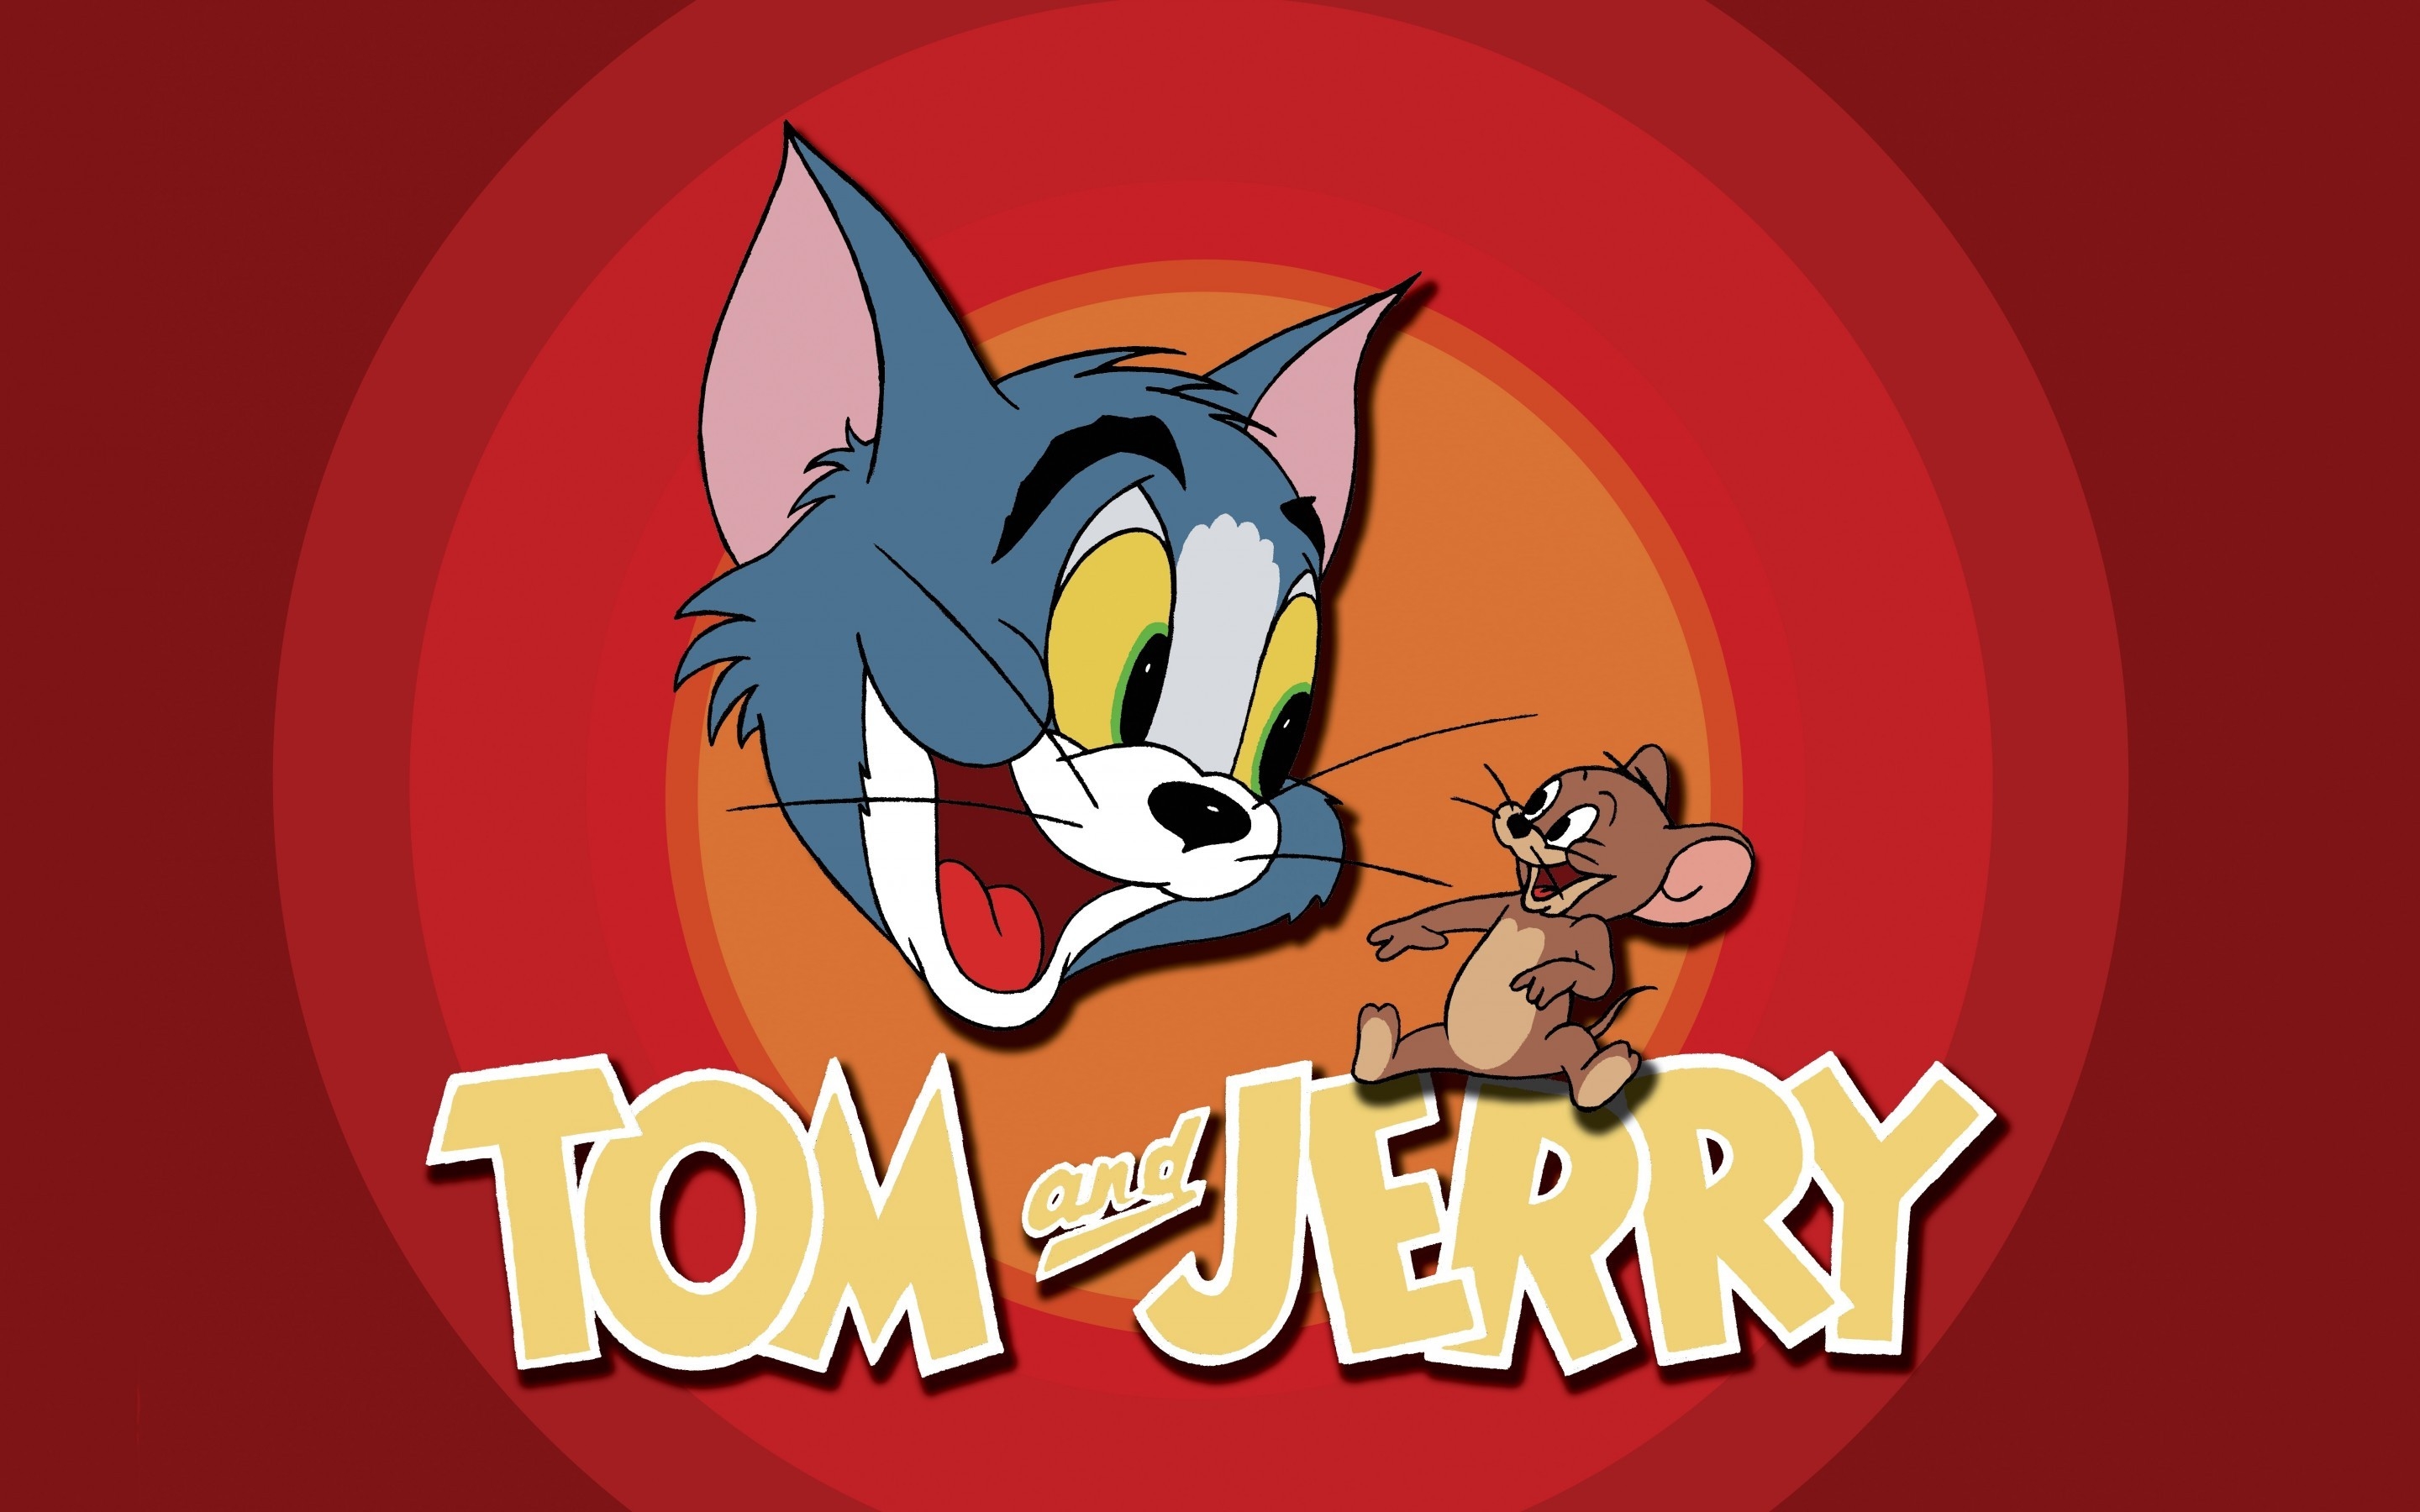 Tom and Jerry for 2880 x 1800 Retina Display resolution